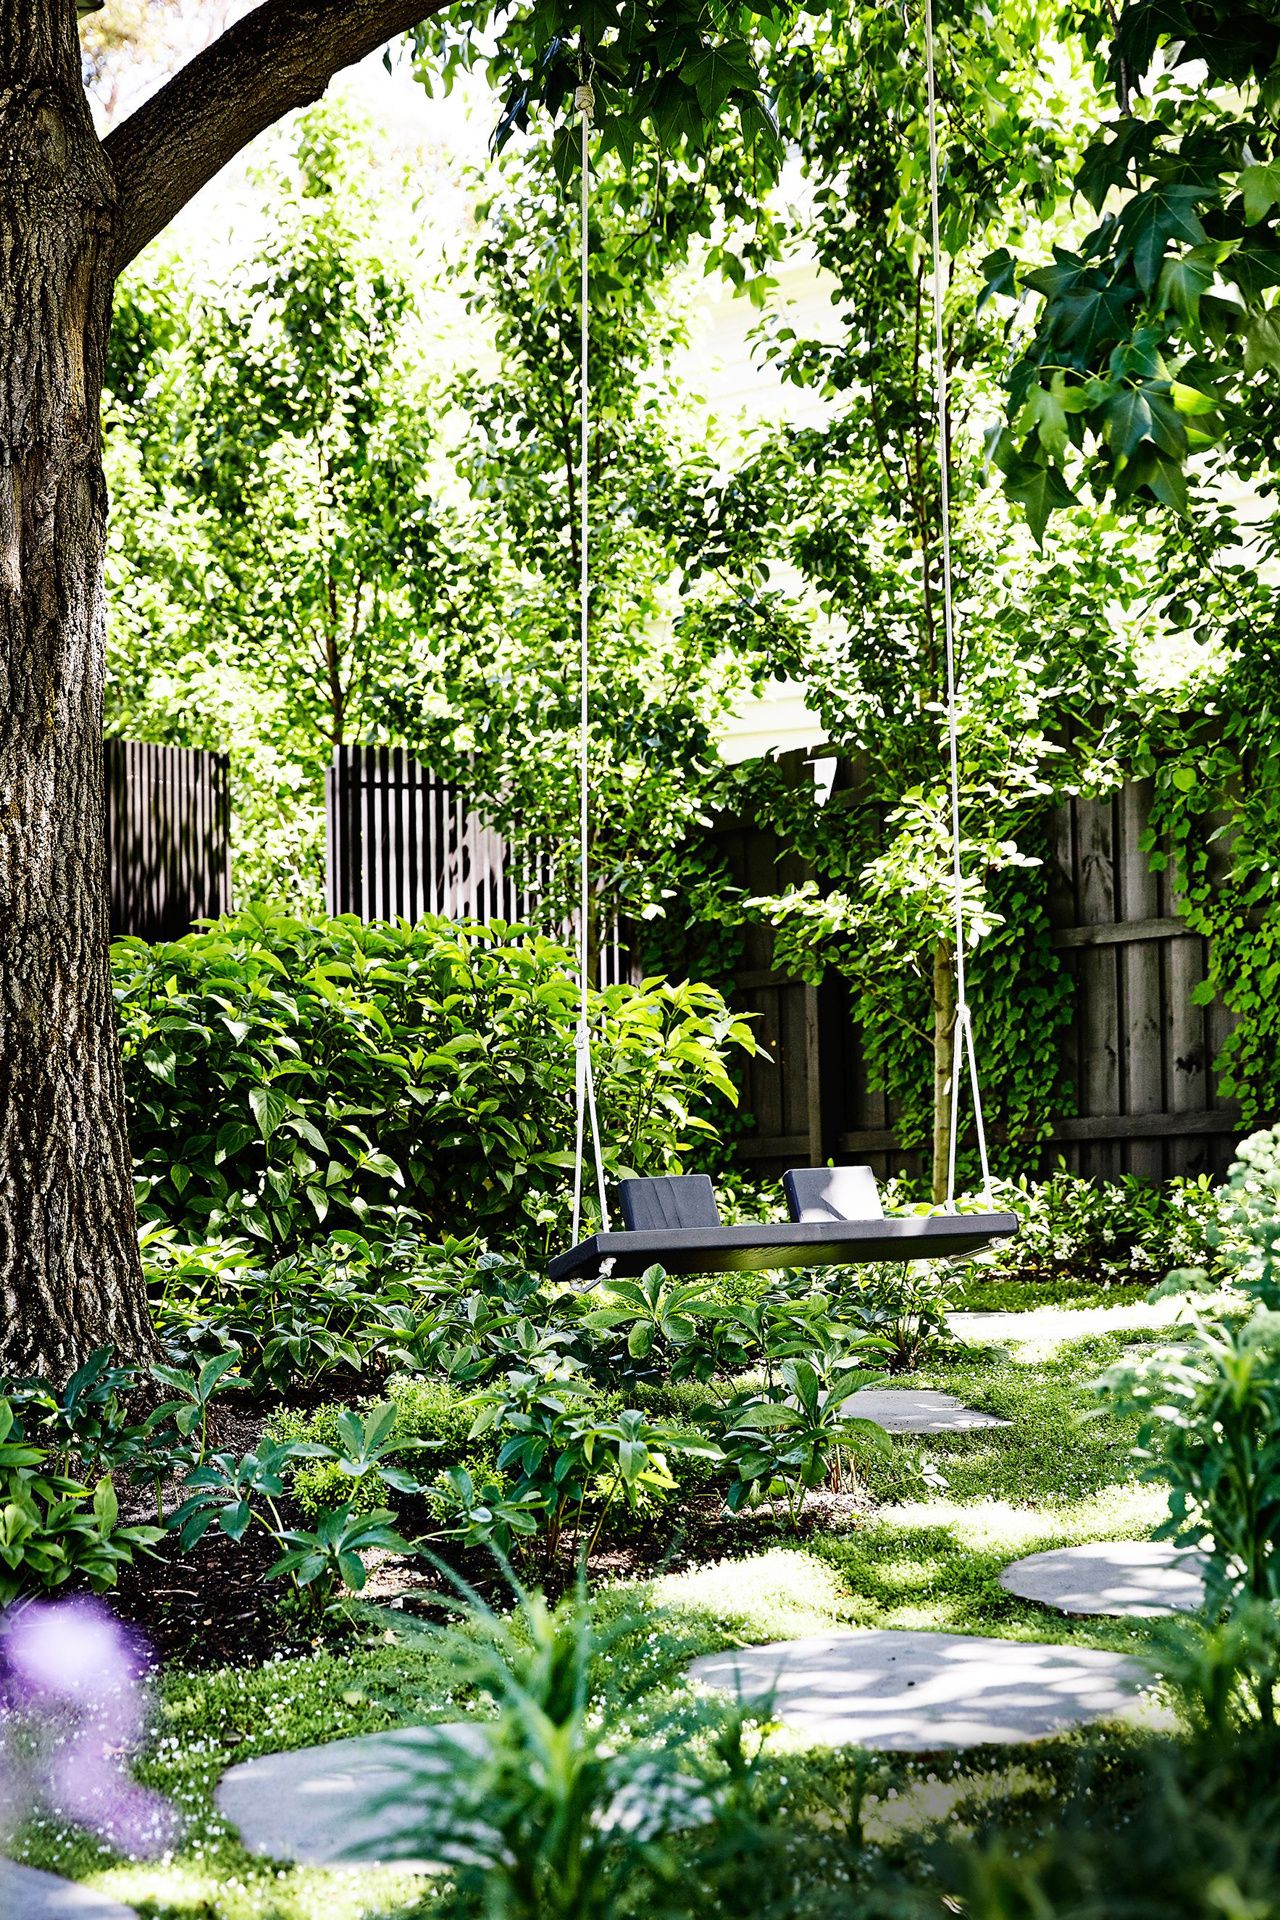 Transform Your Outdoor Space with a
Stylish Garden Swing